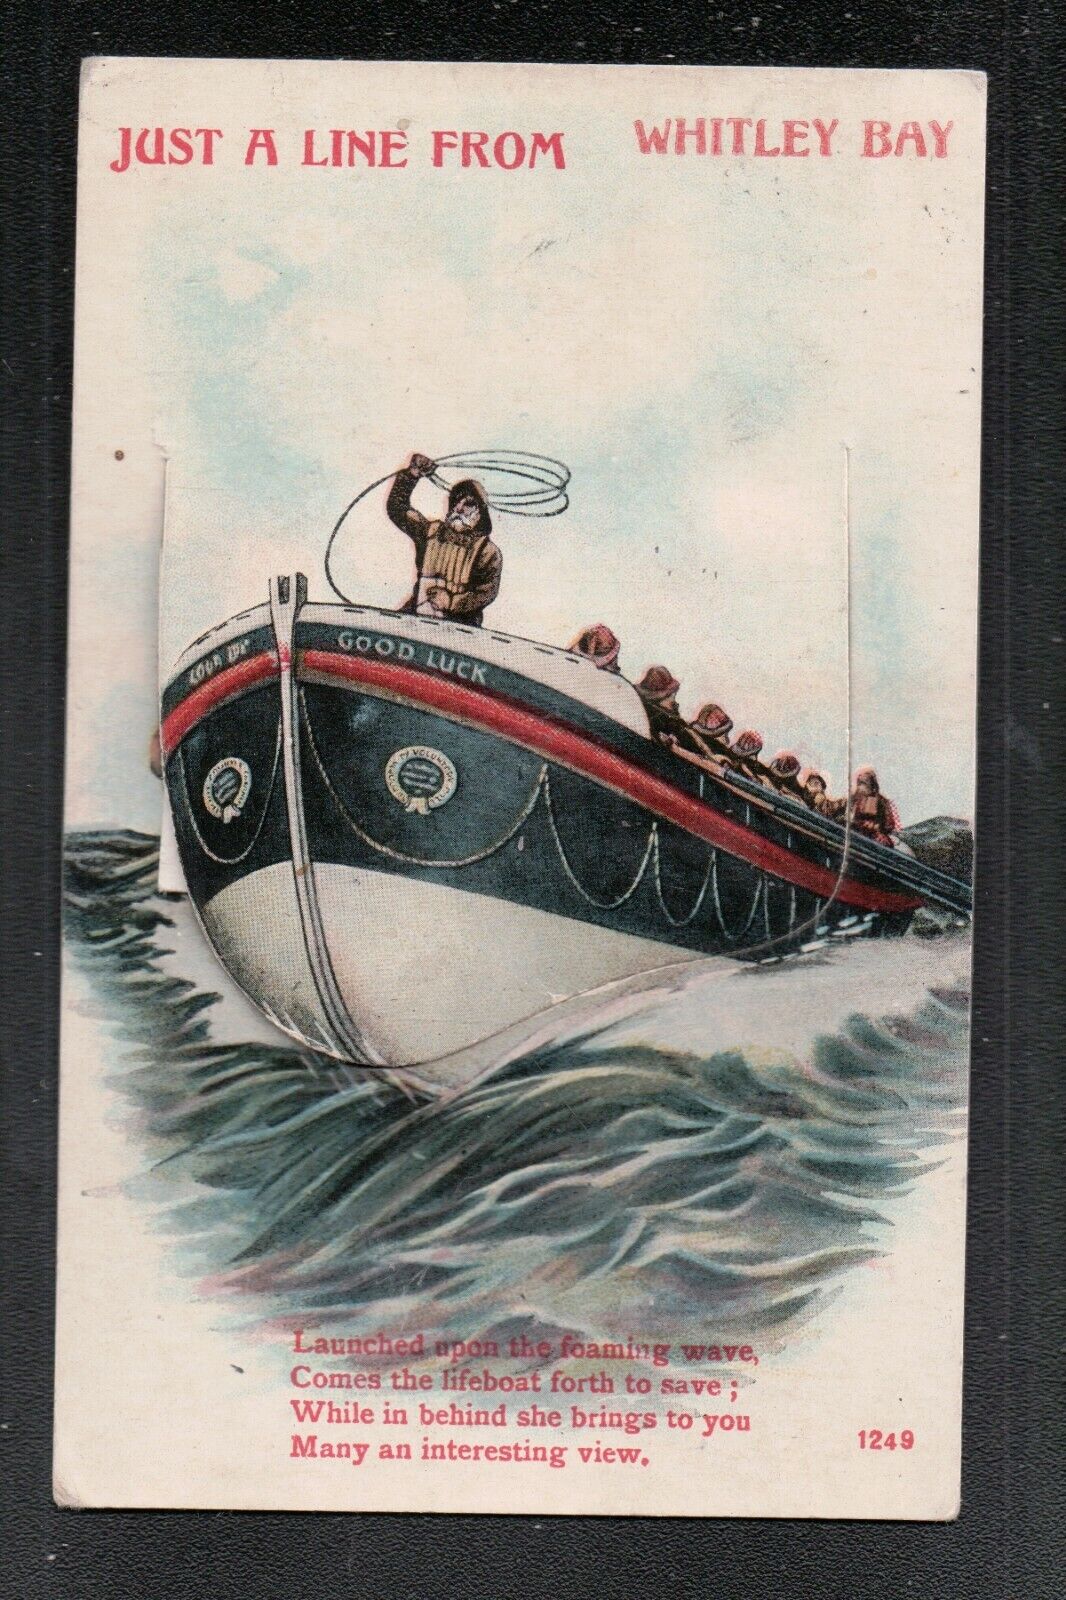 House Clearance - Just a Line from WHITLEY BAY 1920's ? Mailing Novelty Service ~ LIFEBOAT